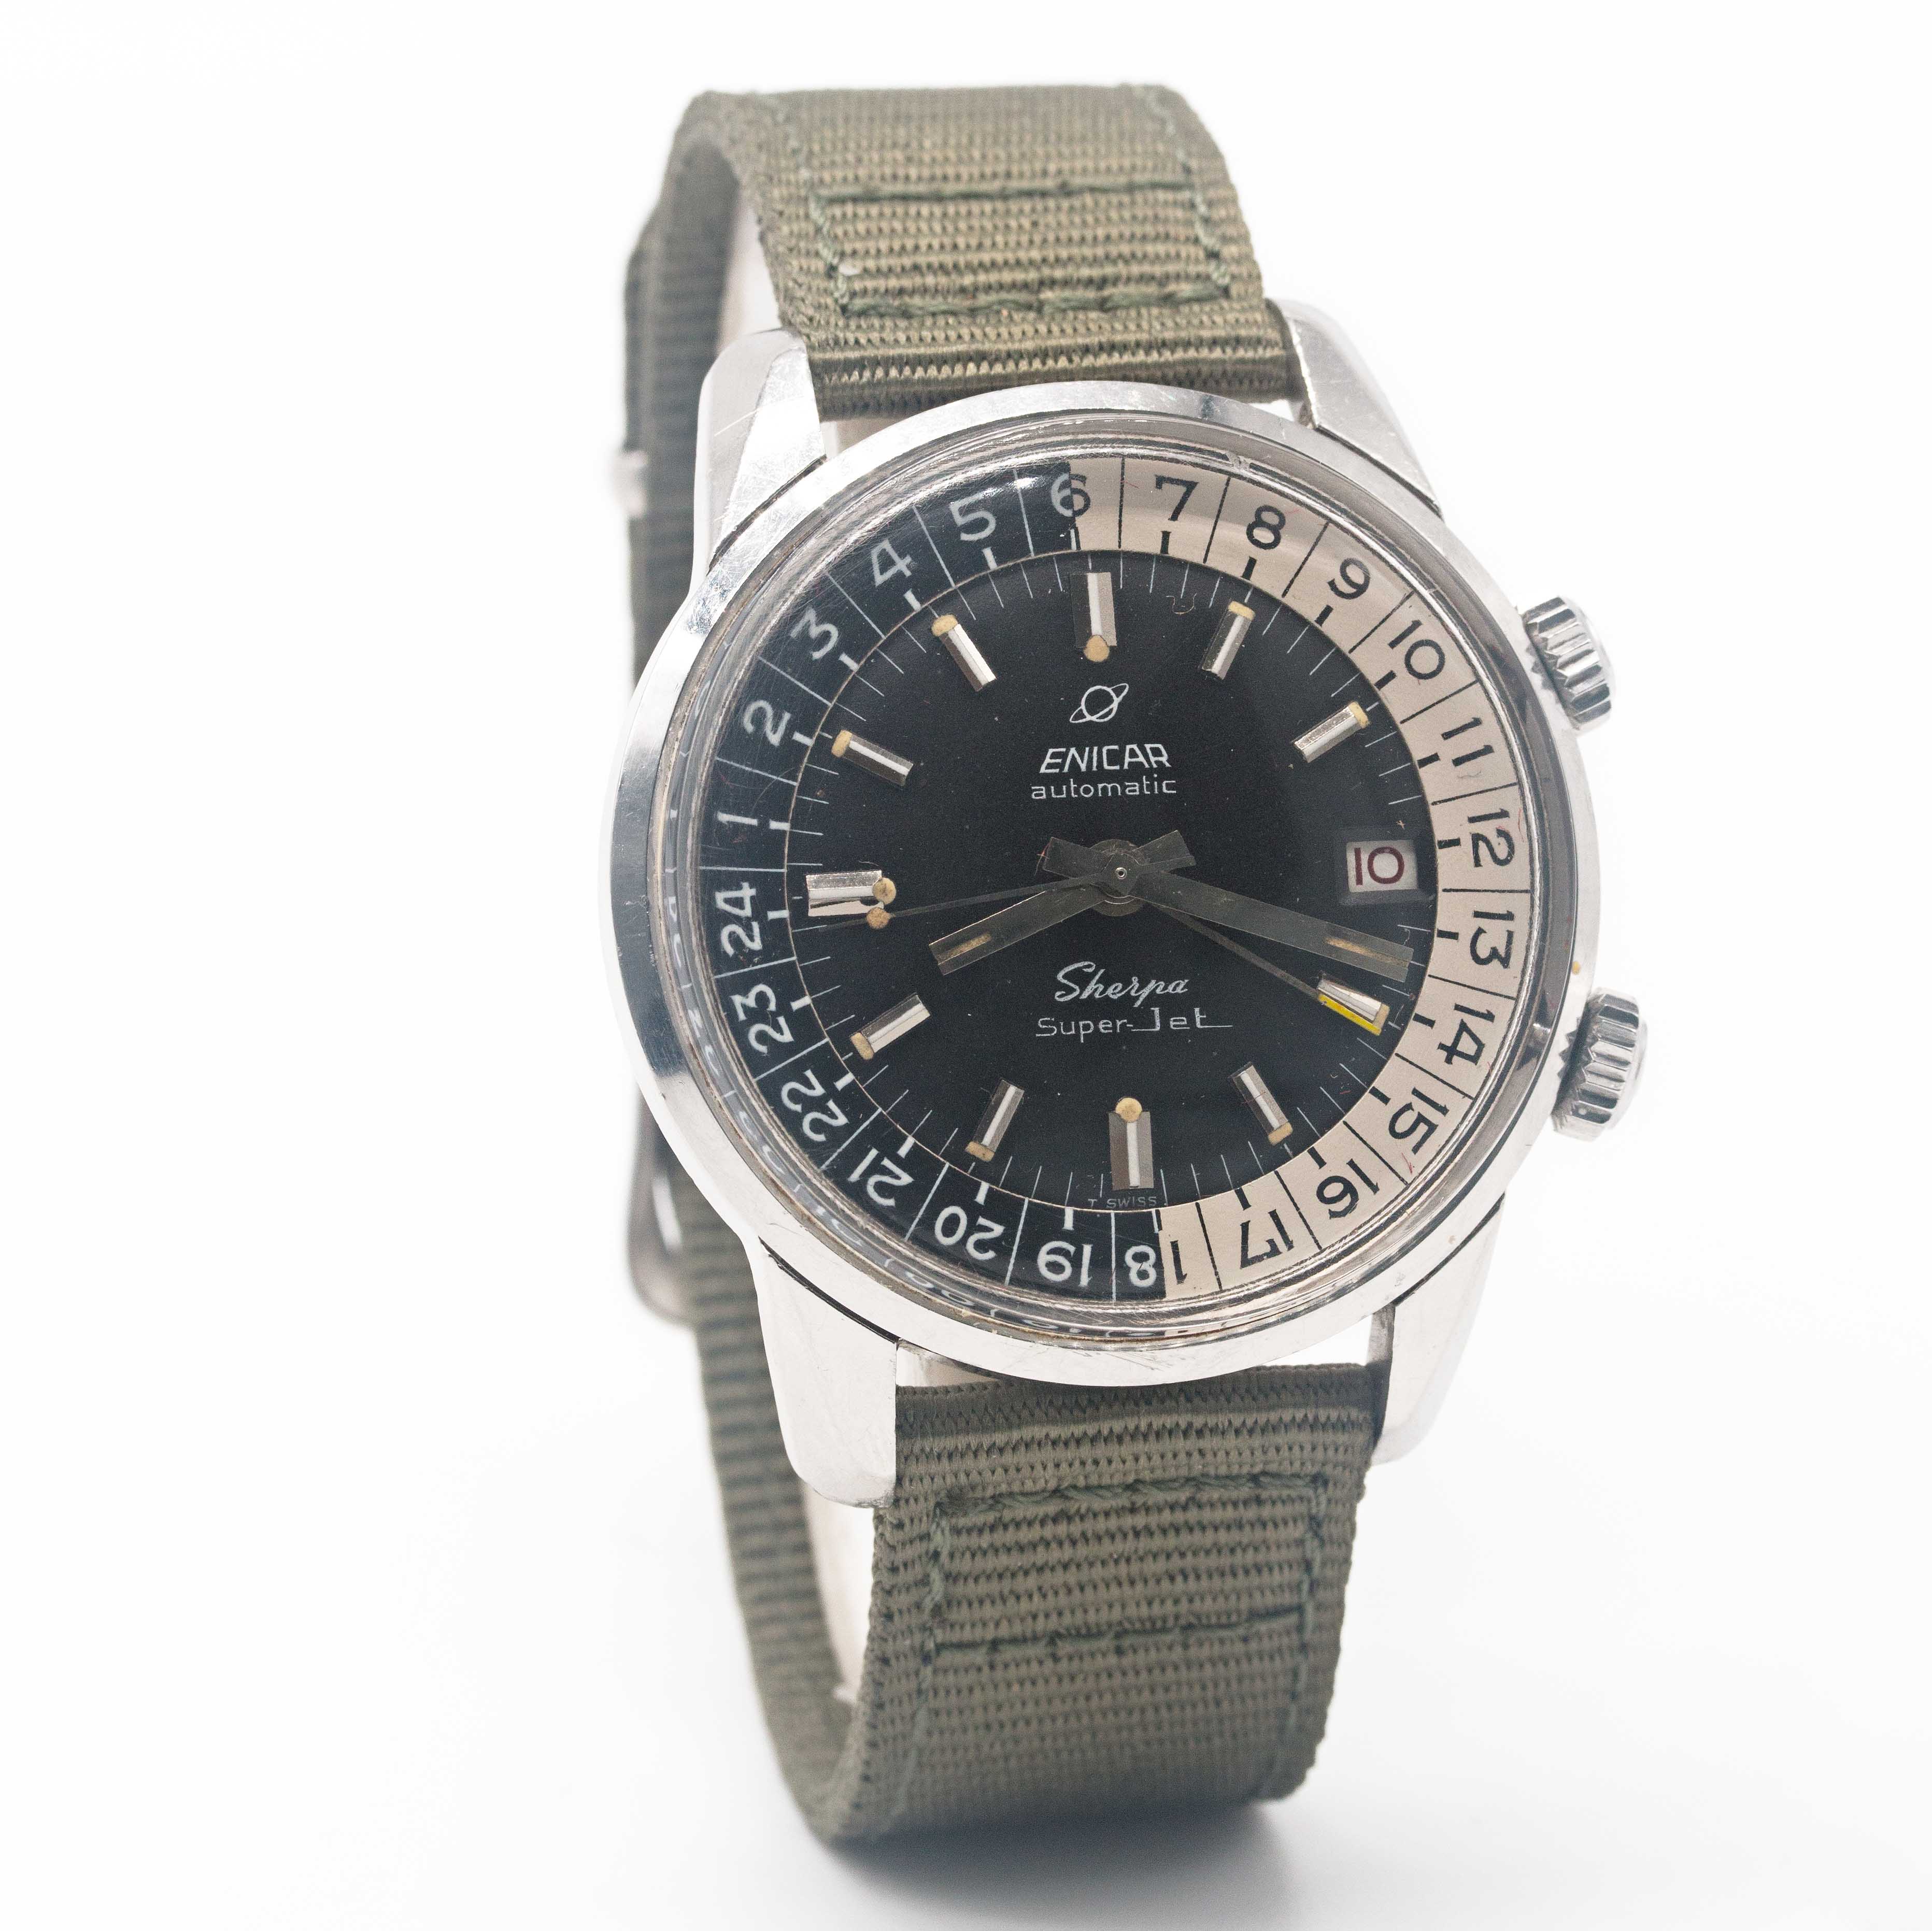 A GENTLEMAN'S STAINLESS STEEL ENICAR SHERPA SUPER JET GMT WRIST WATCH CIRCA 1960s, REF. 146/003 WITH - Image 5 of 8